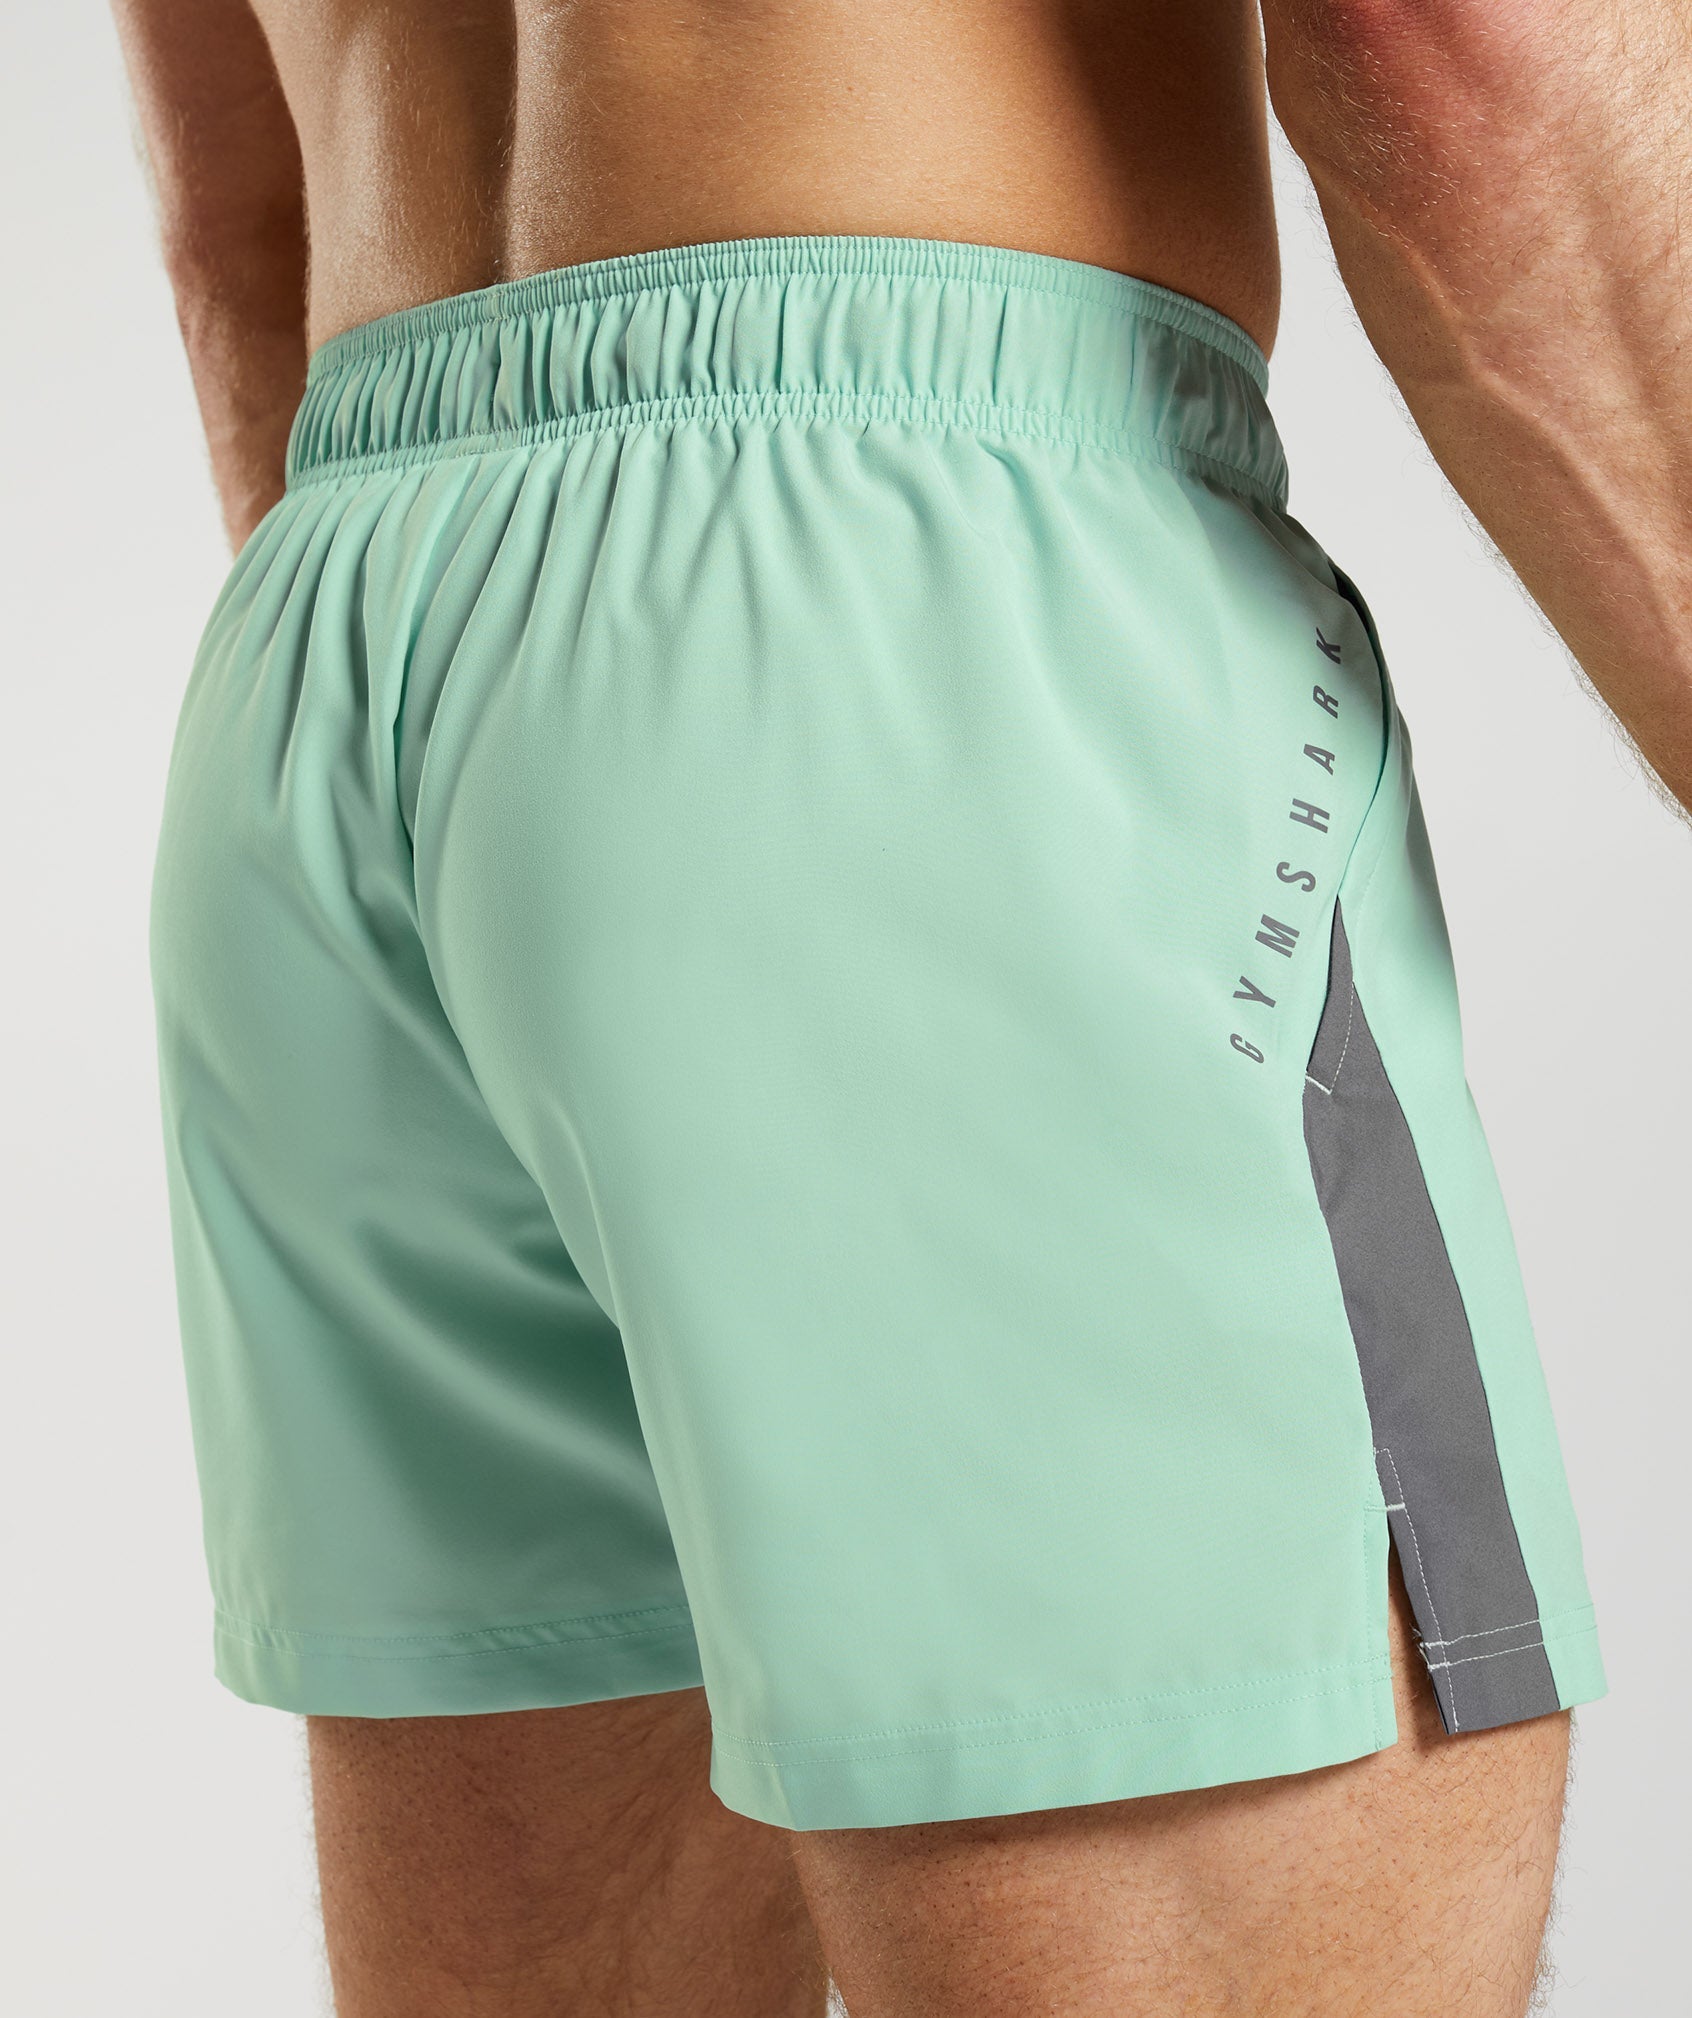 Sport 5" Shorts in Pastel Green/Silhouette Grey - view 6